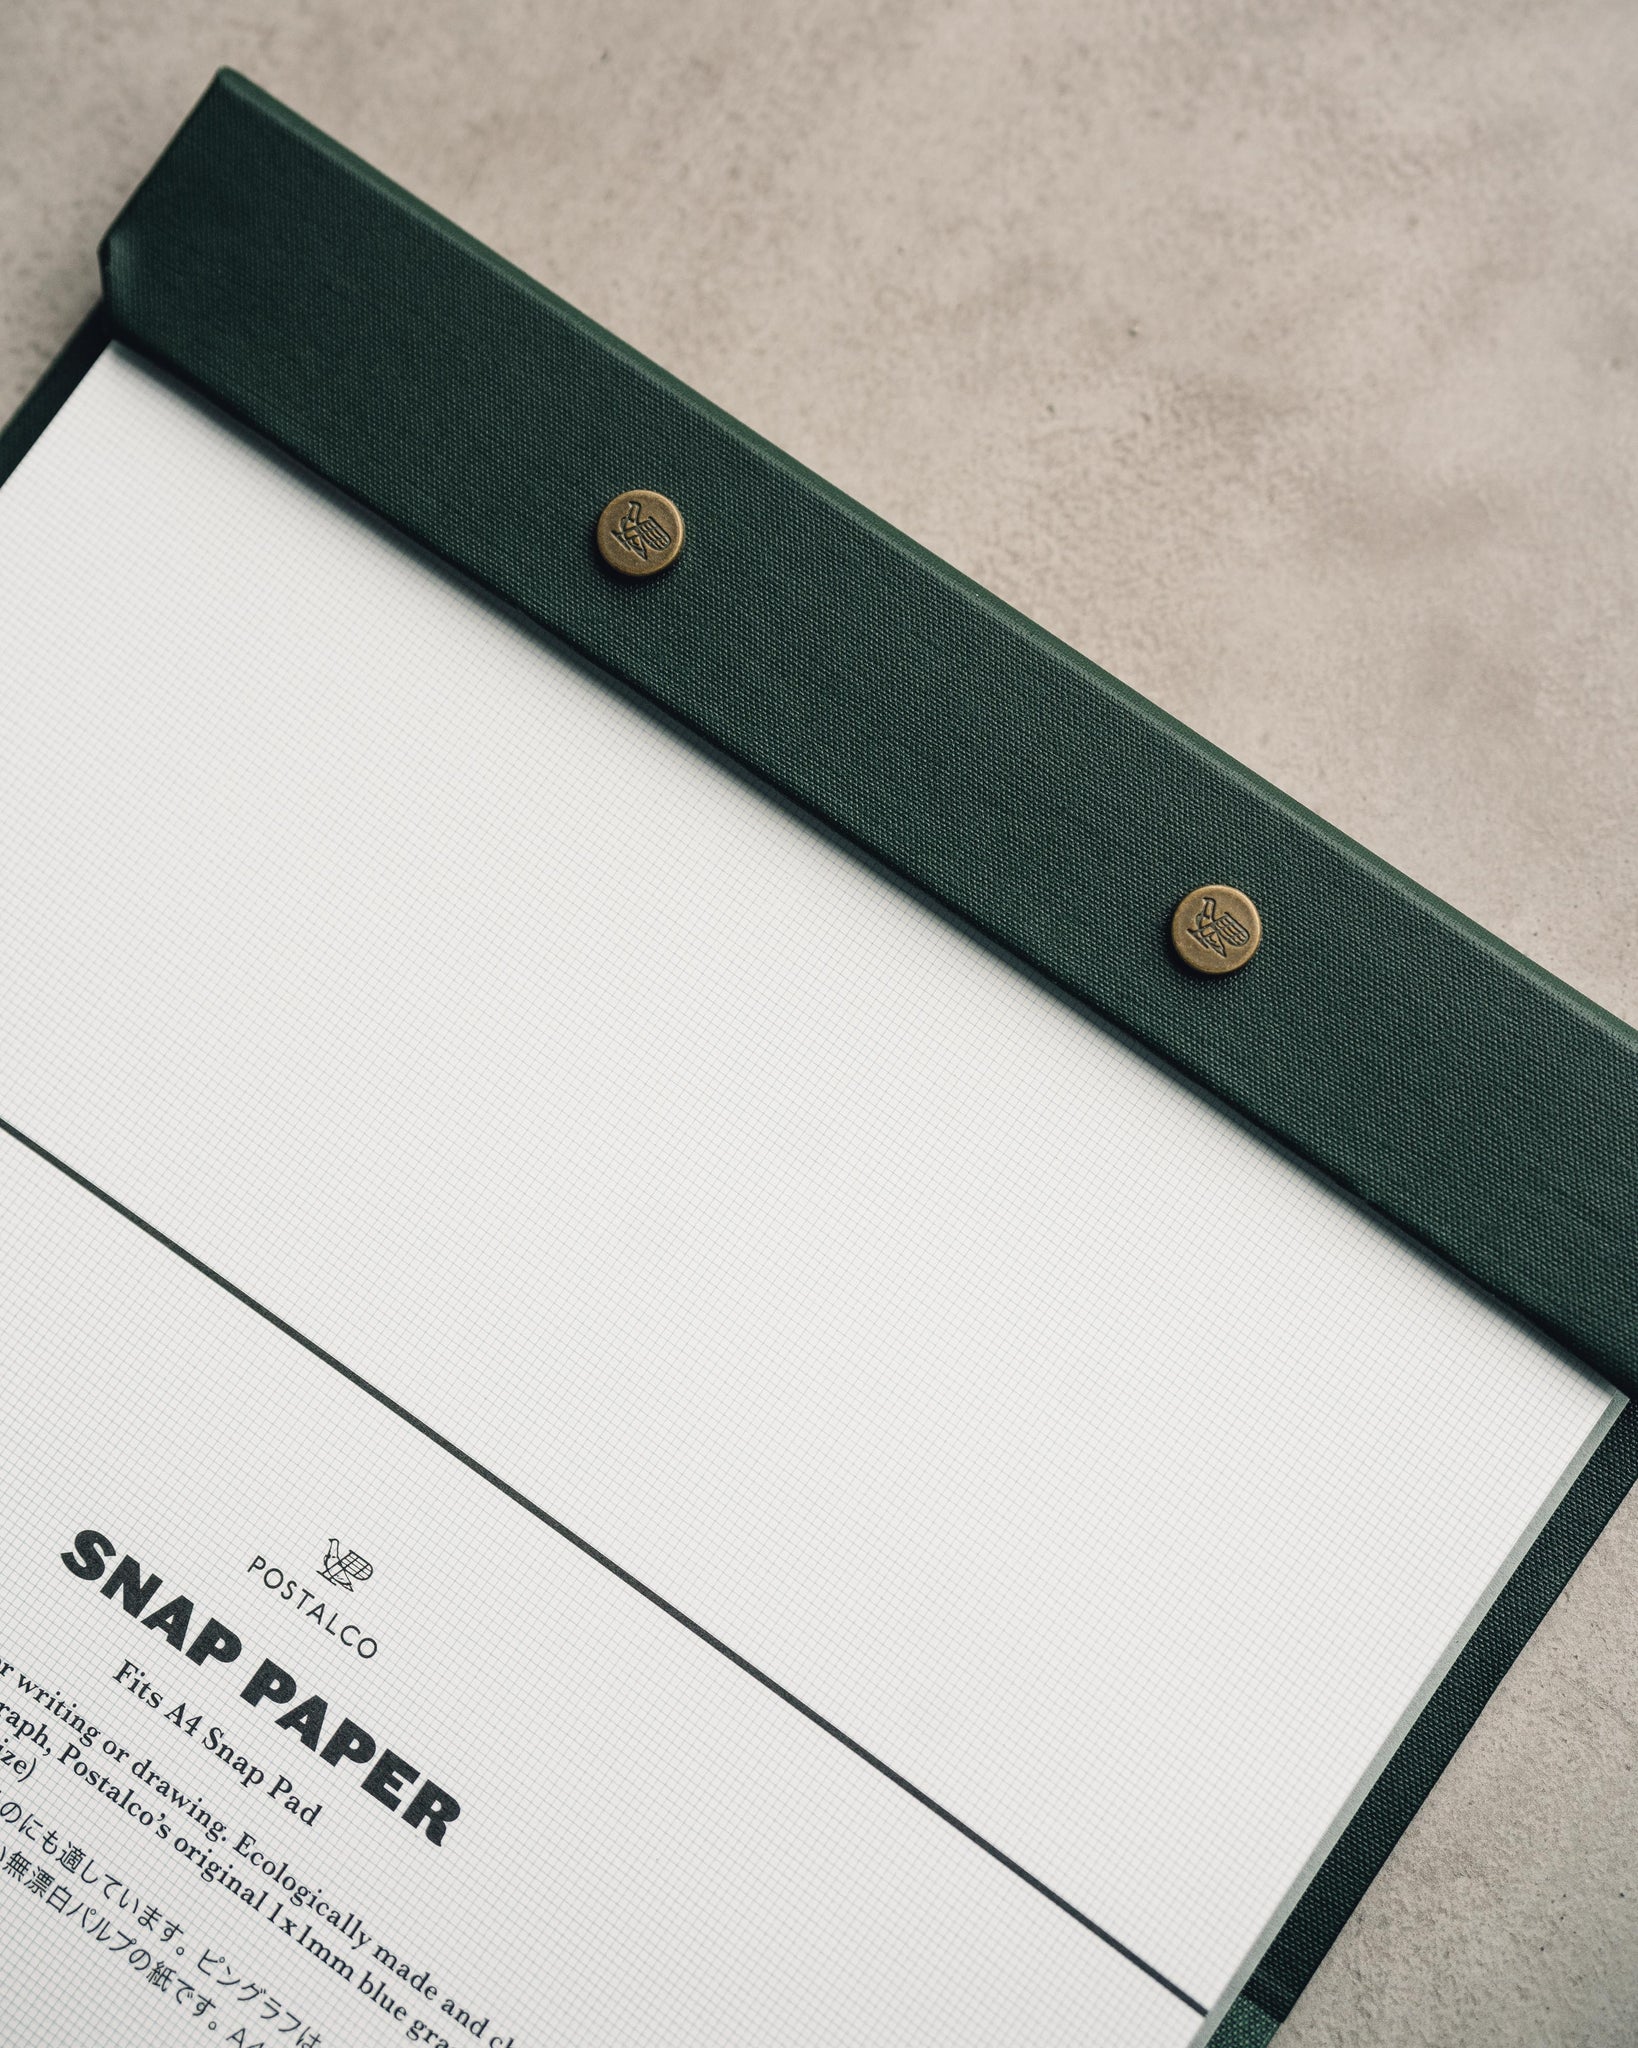 Postalco Snap Pad, Forest Green